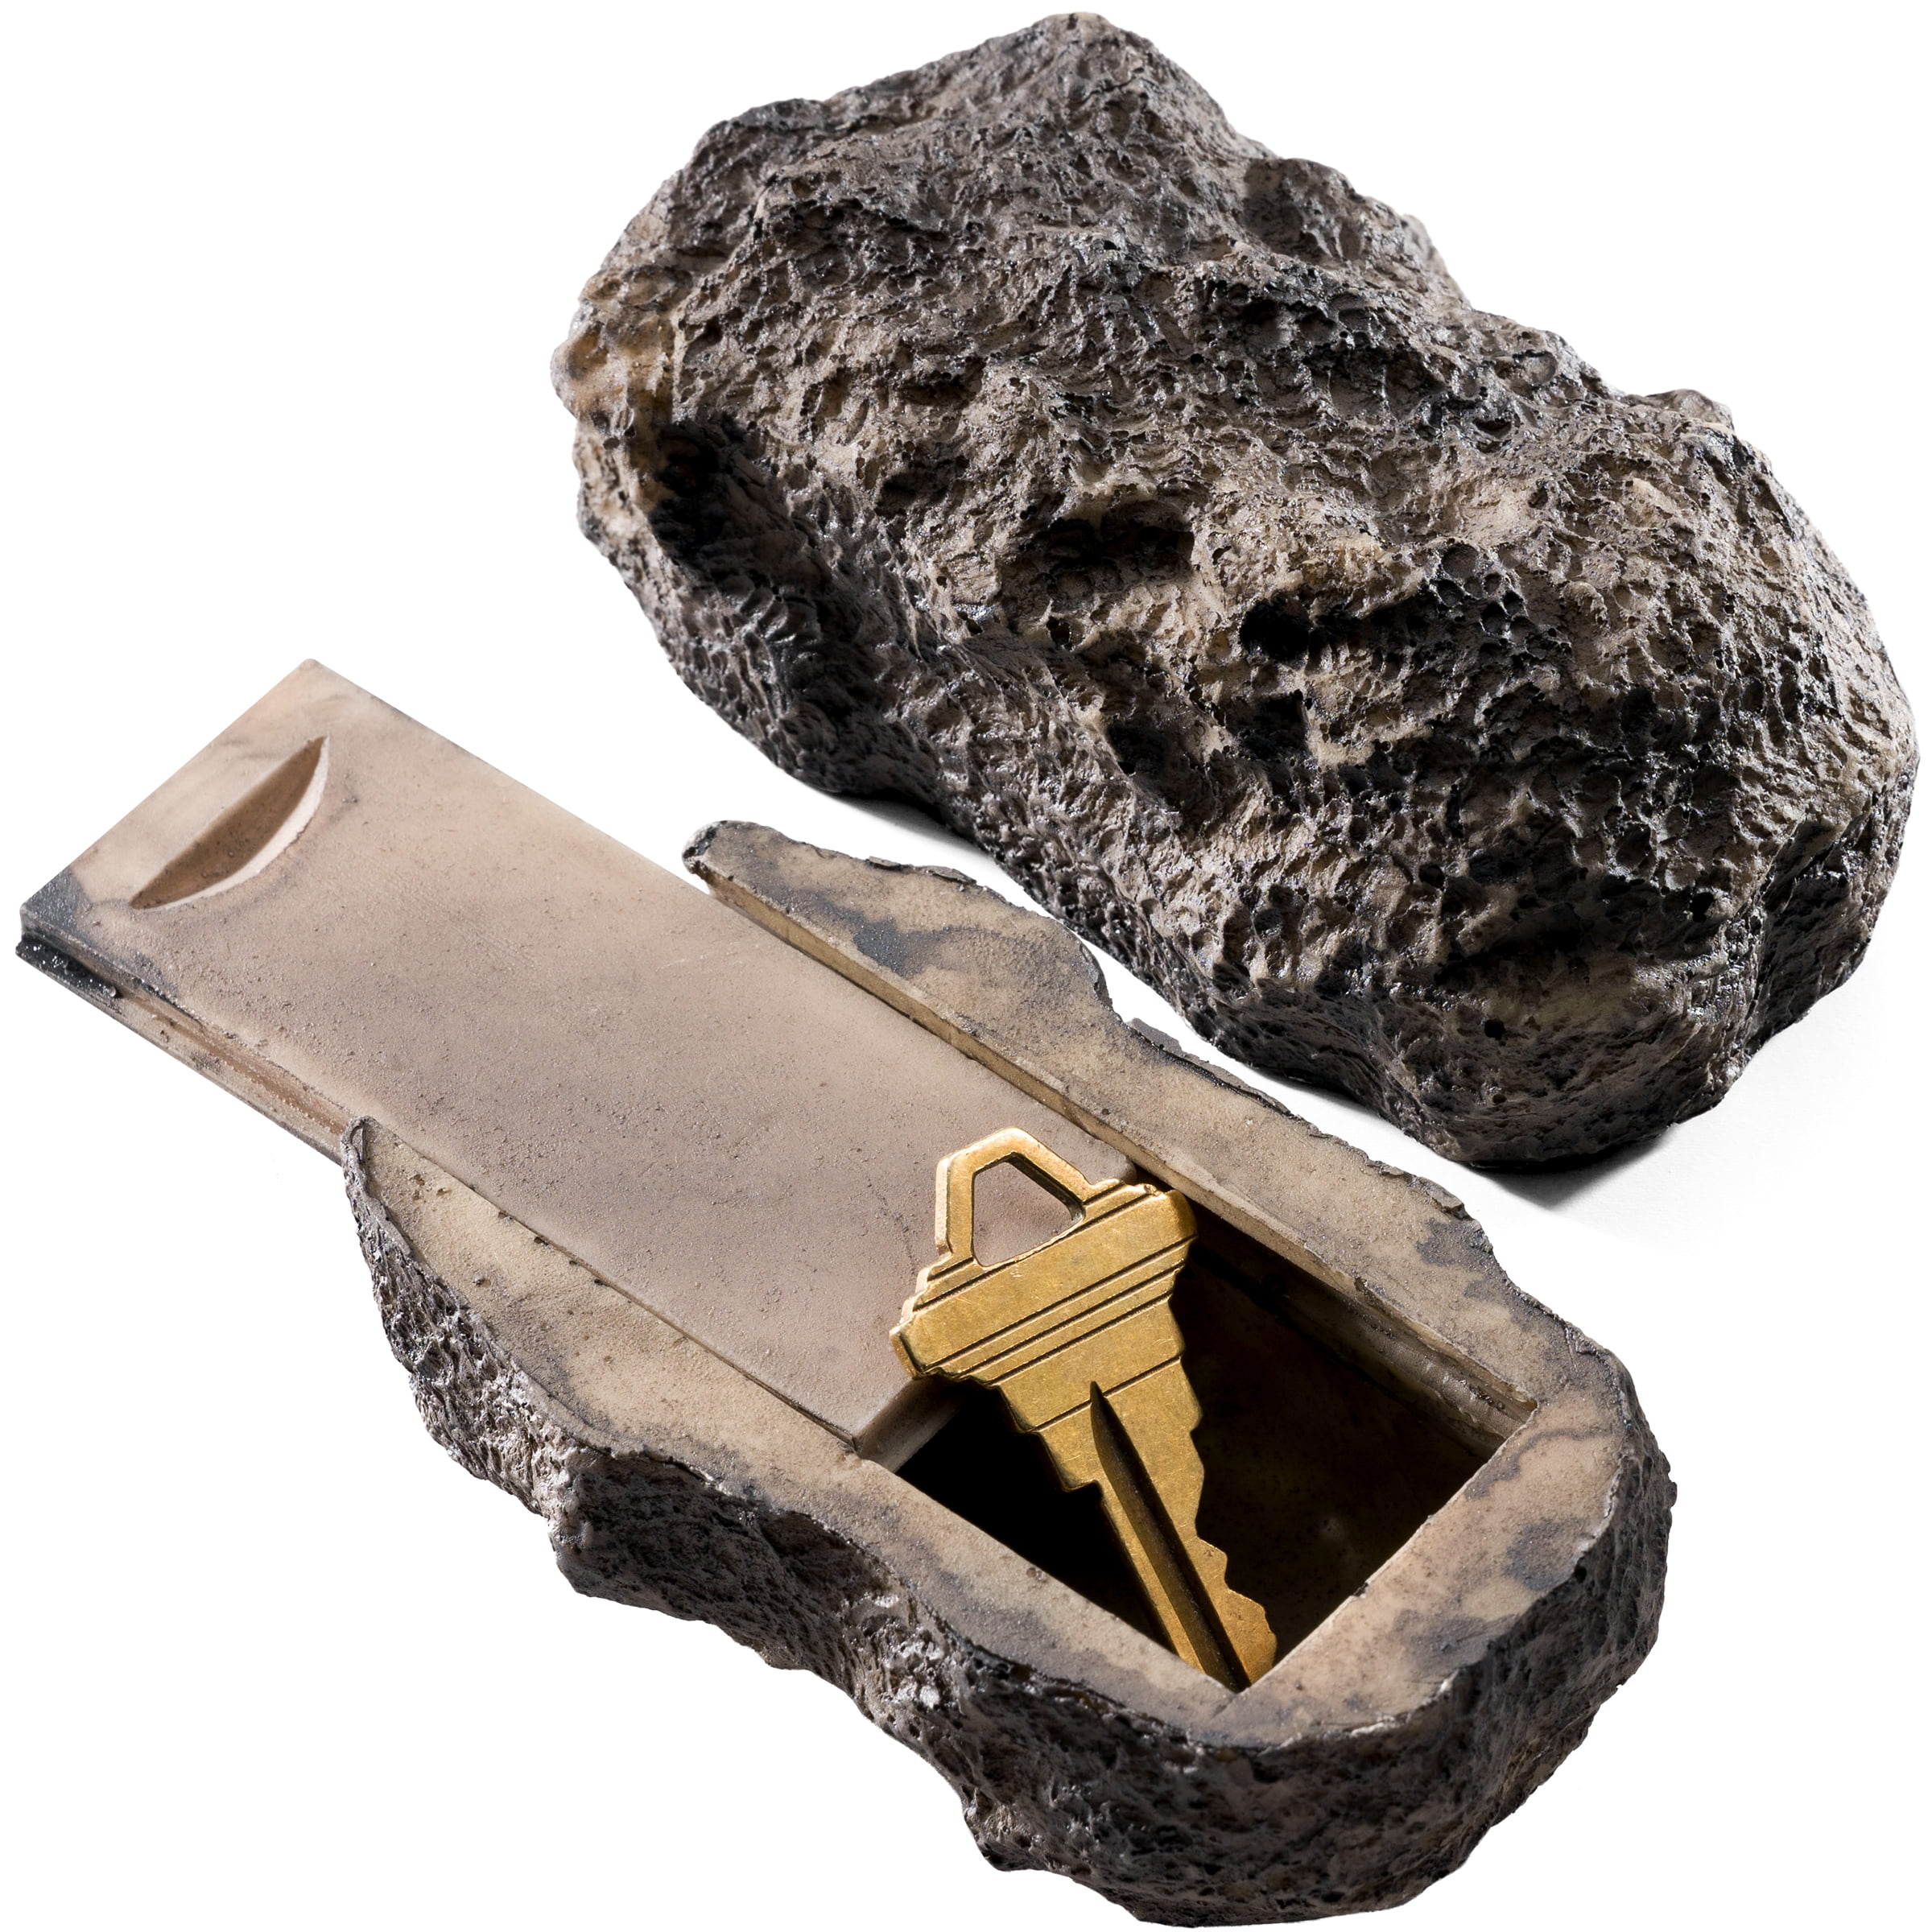 Rockey Safe Hide A Key in Plain Sight in A Real Looking Rock/Stone, Holds Standard Sized Spare Keys